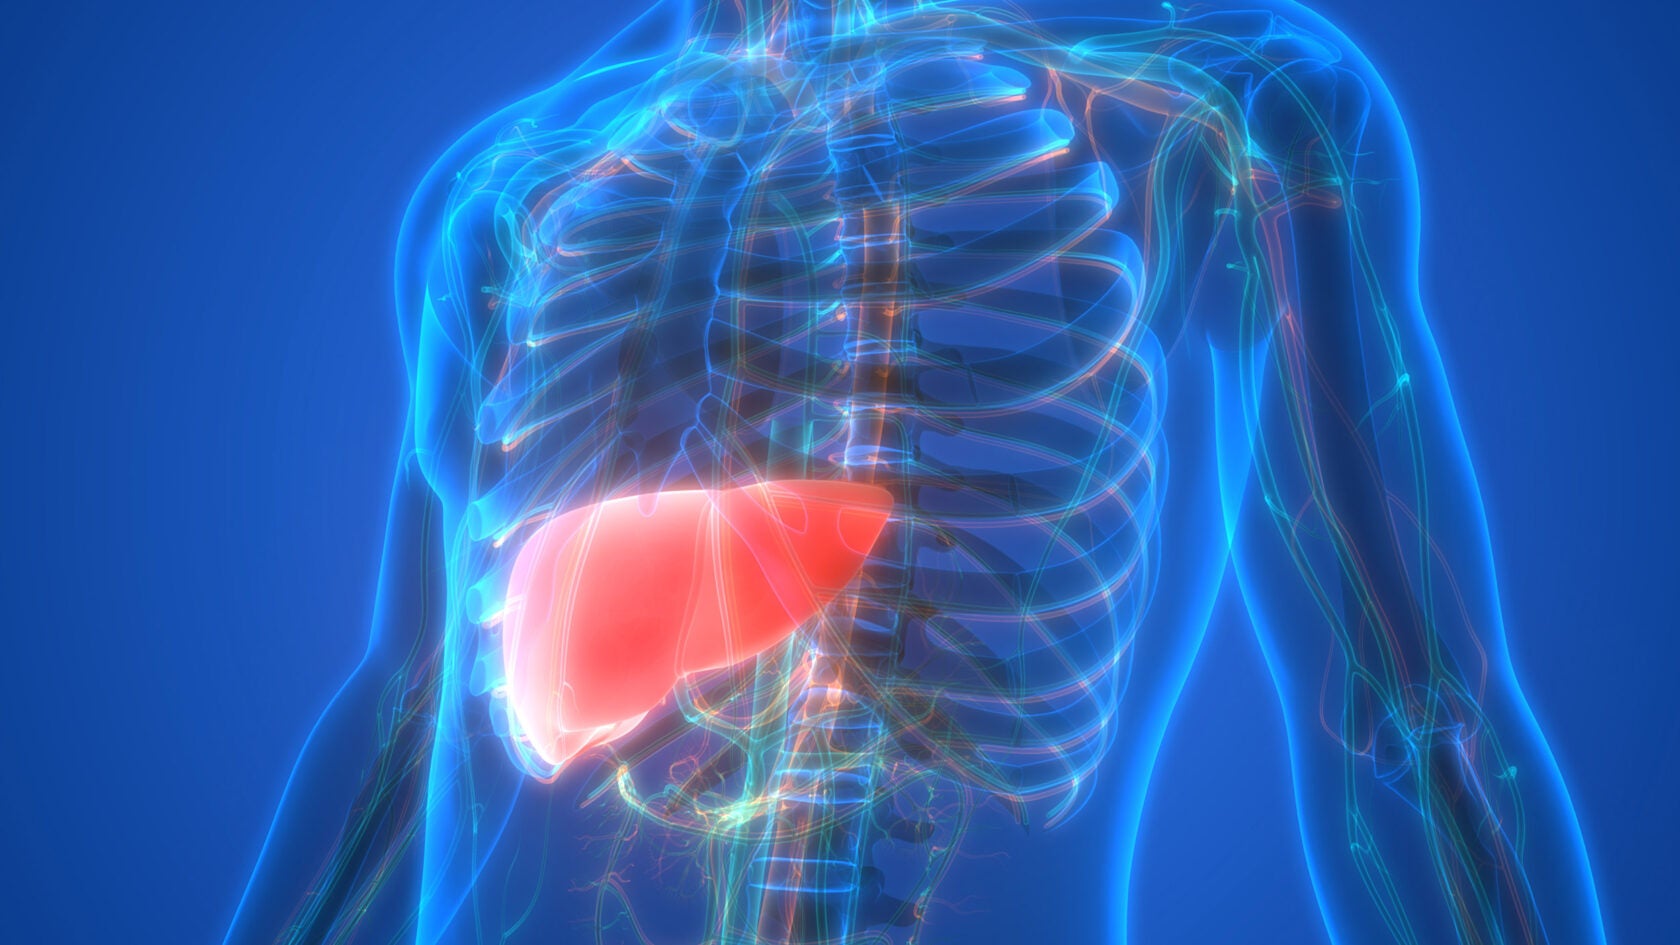 Getting ahead of liver cancer